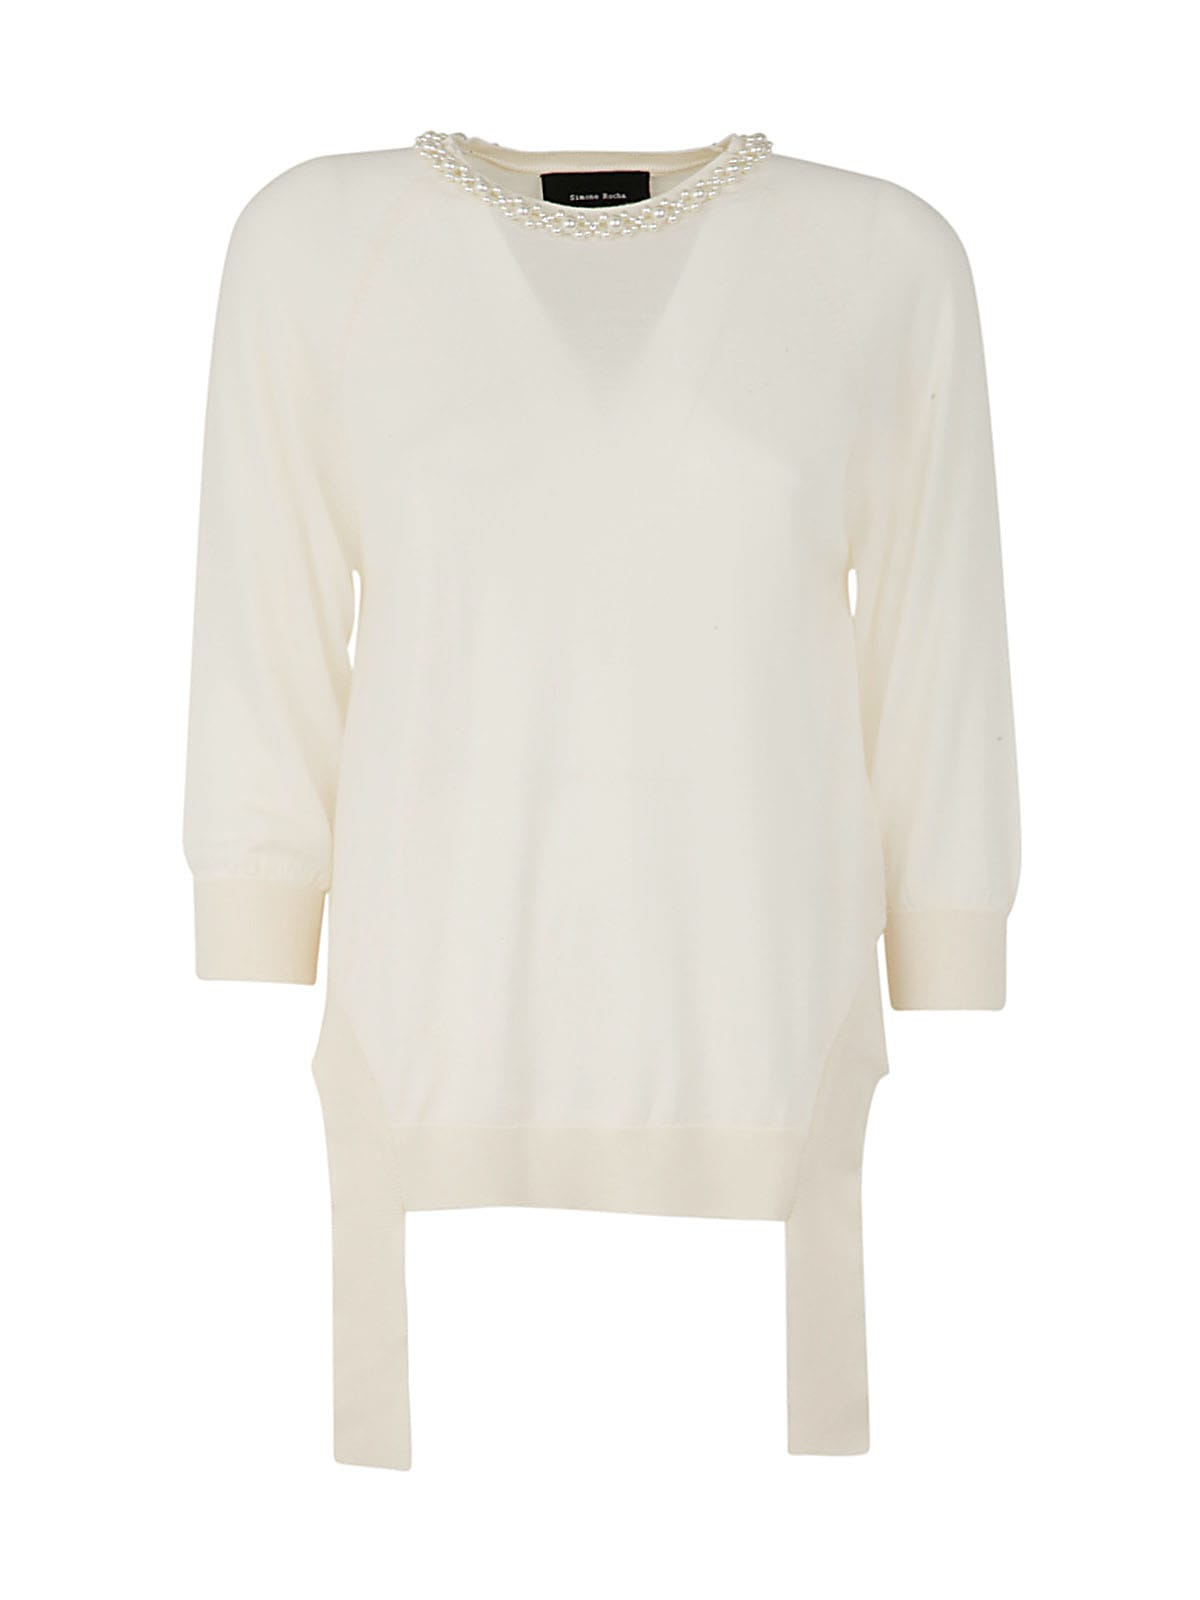 SIMONE ROCHA LONG SLEEVE JUMPER WITH CUT OUT SIDES, TAILS & EMB